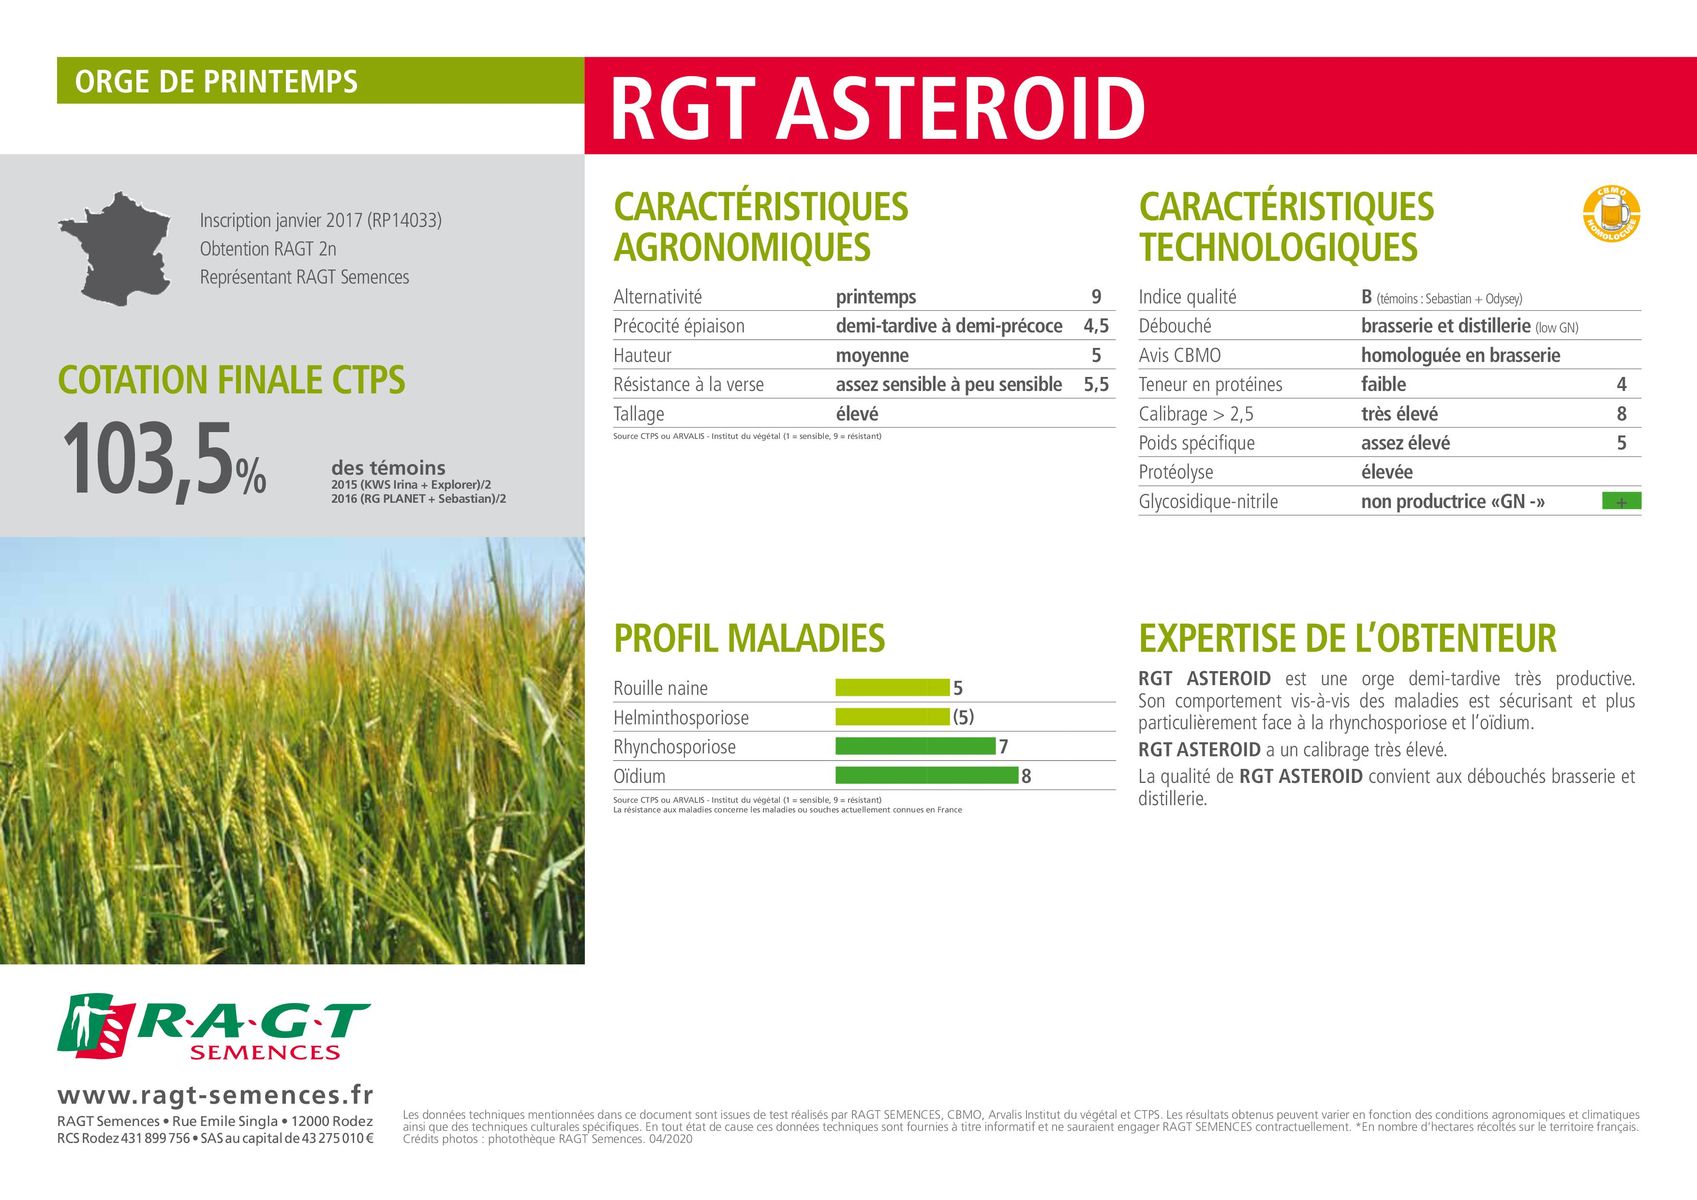 Catalogue RGT ASTEROID, page 00002